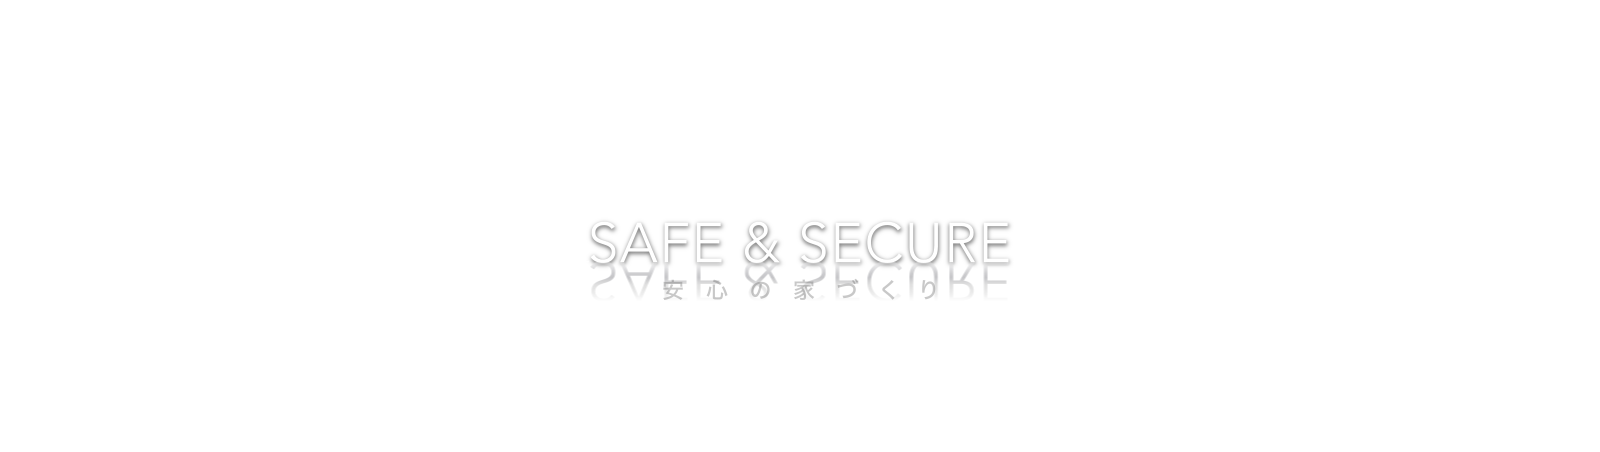 SAFE&SECURE 安心の家づくり